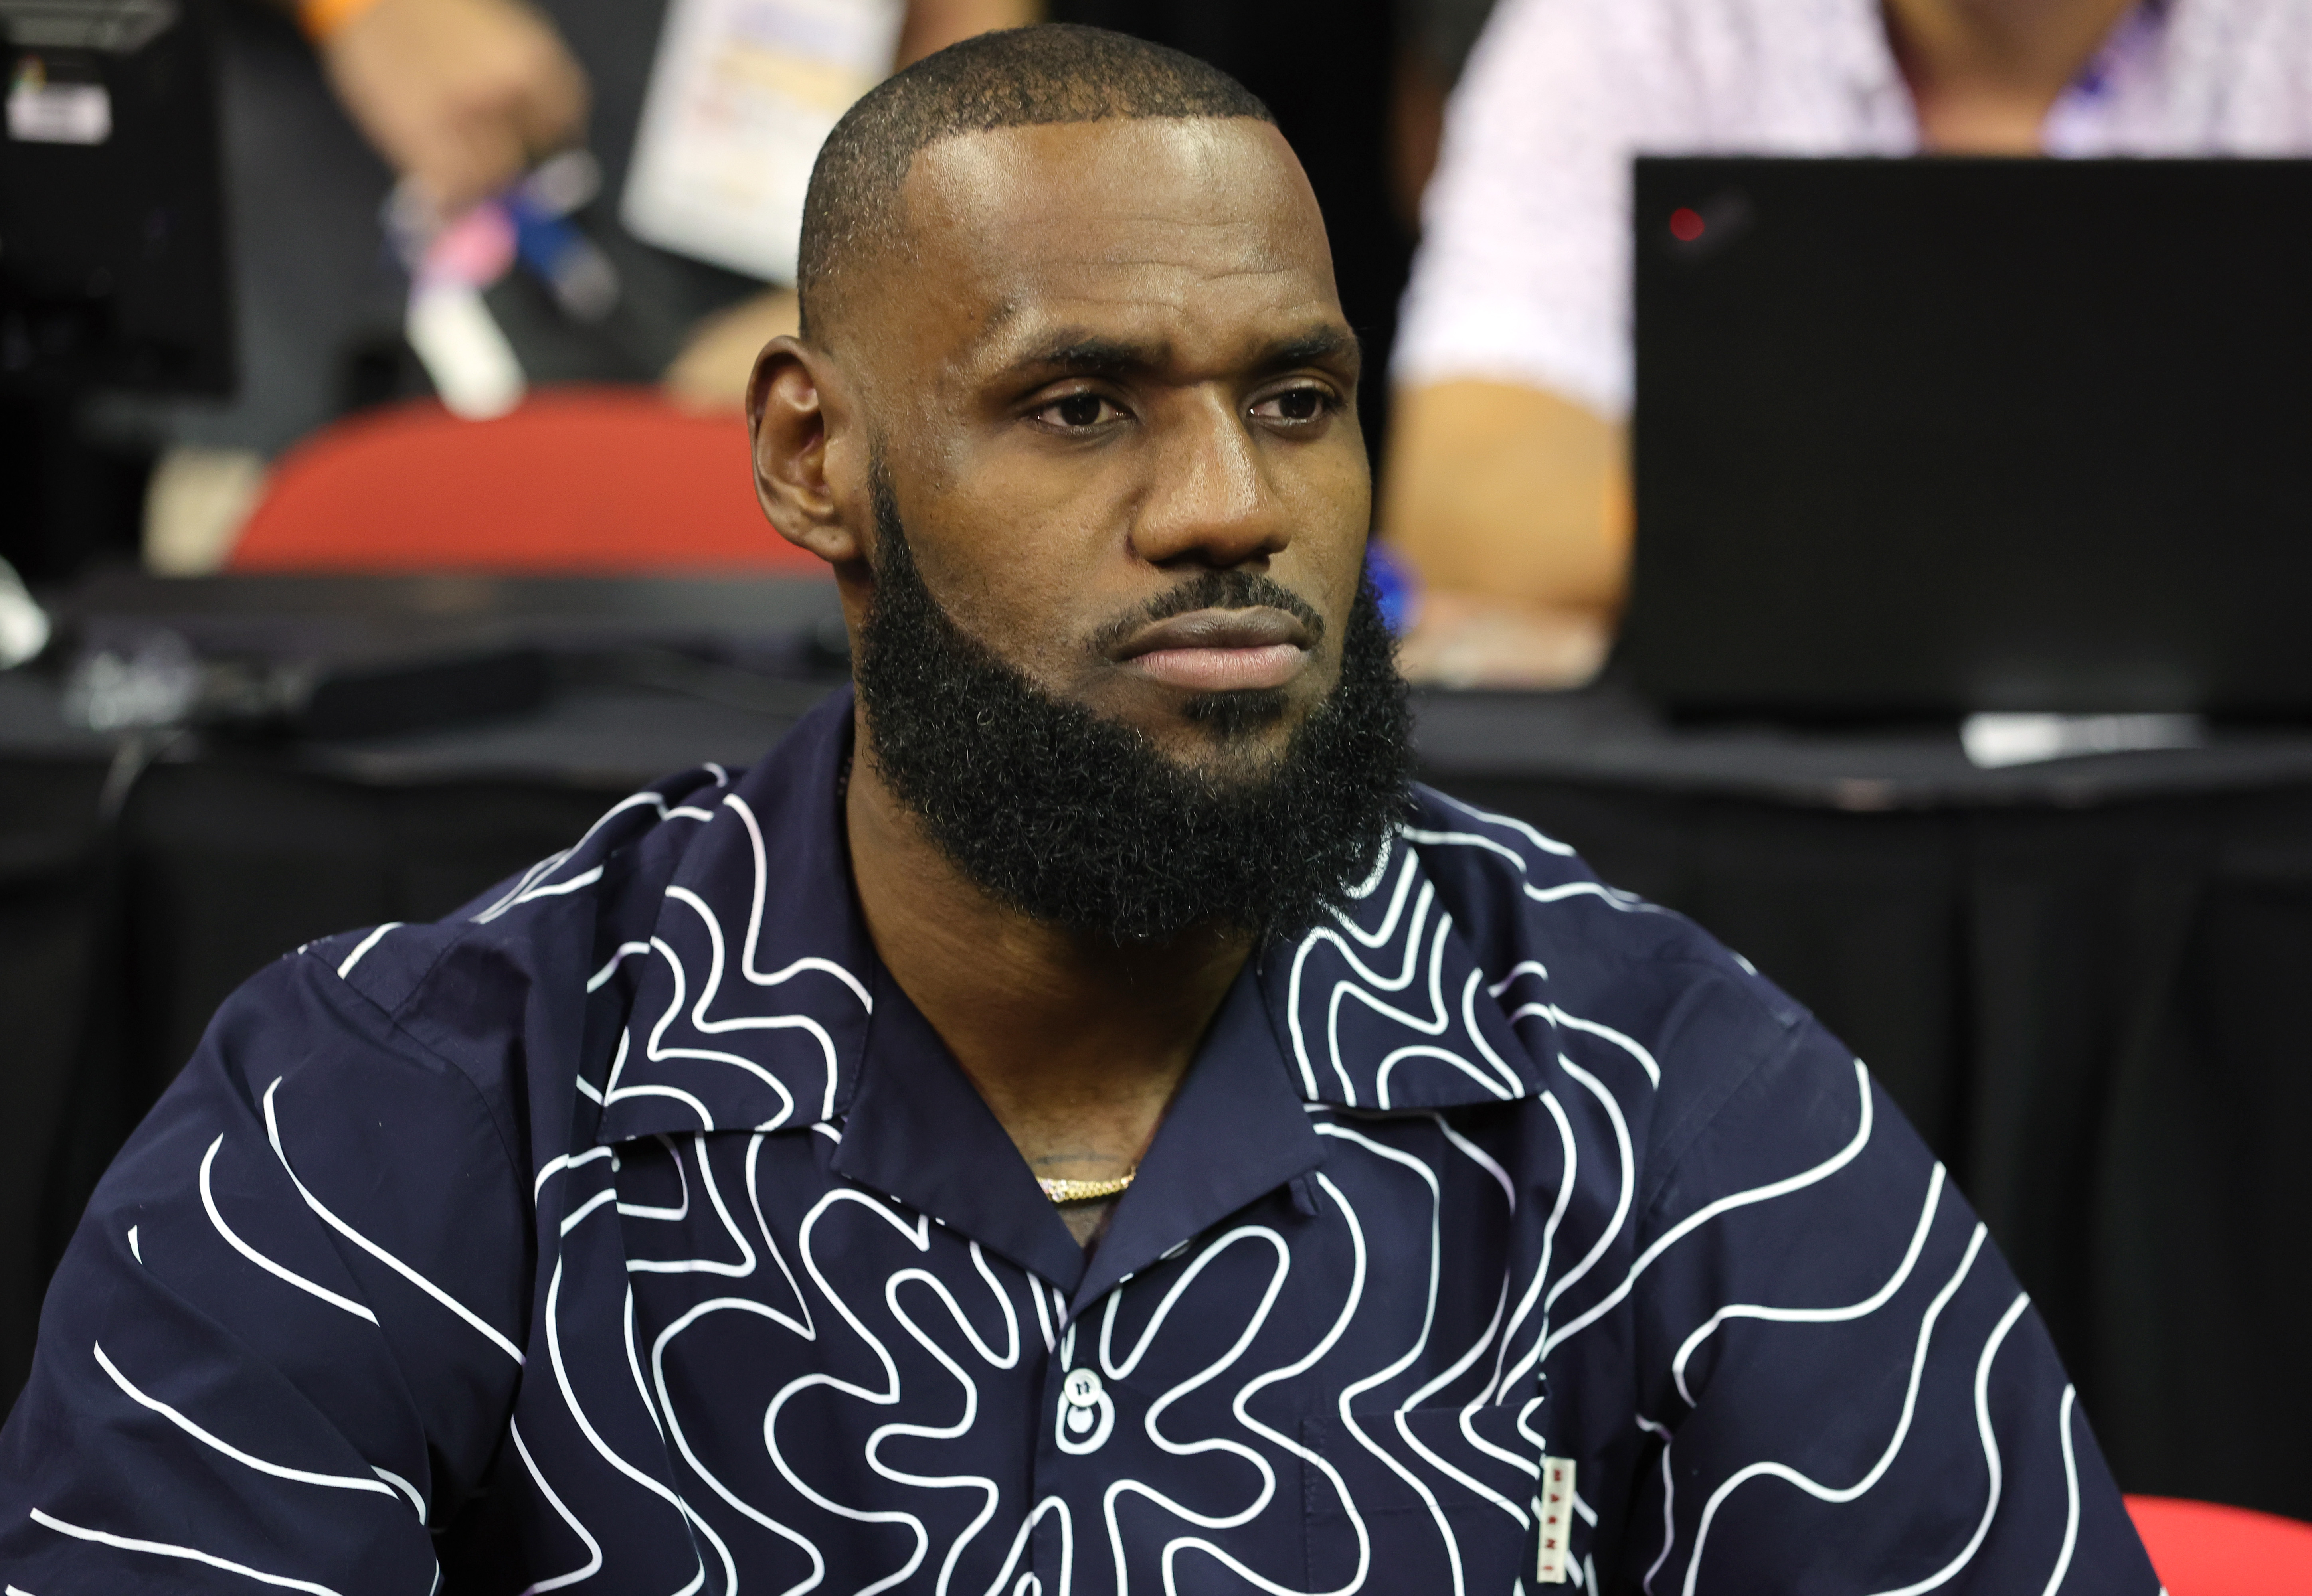 LeBron James attends a game between the Lakers and the Phoenix Suns during the 2022 NBA Summer League on July 8, 2022 in Las Vegas, Nevada | Source: Getty Images